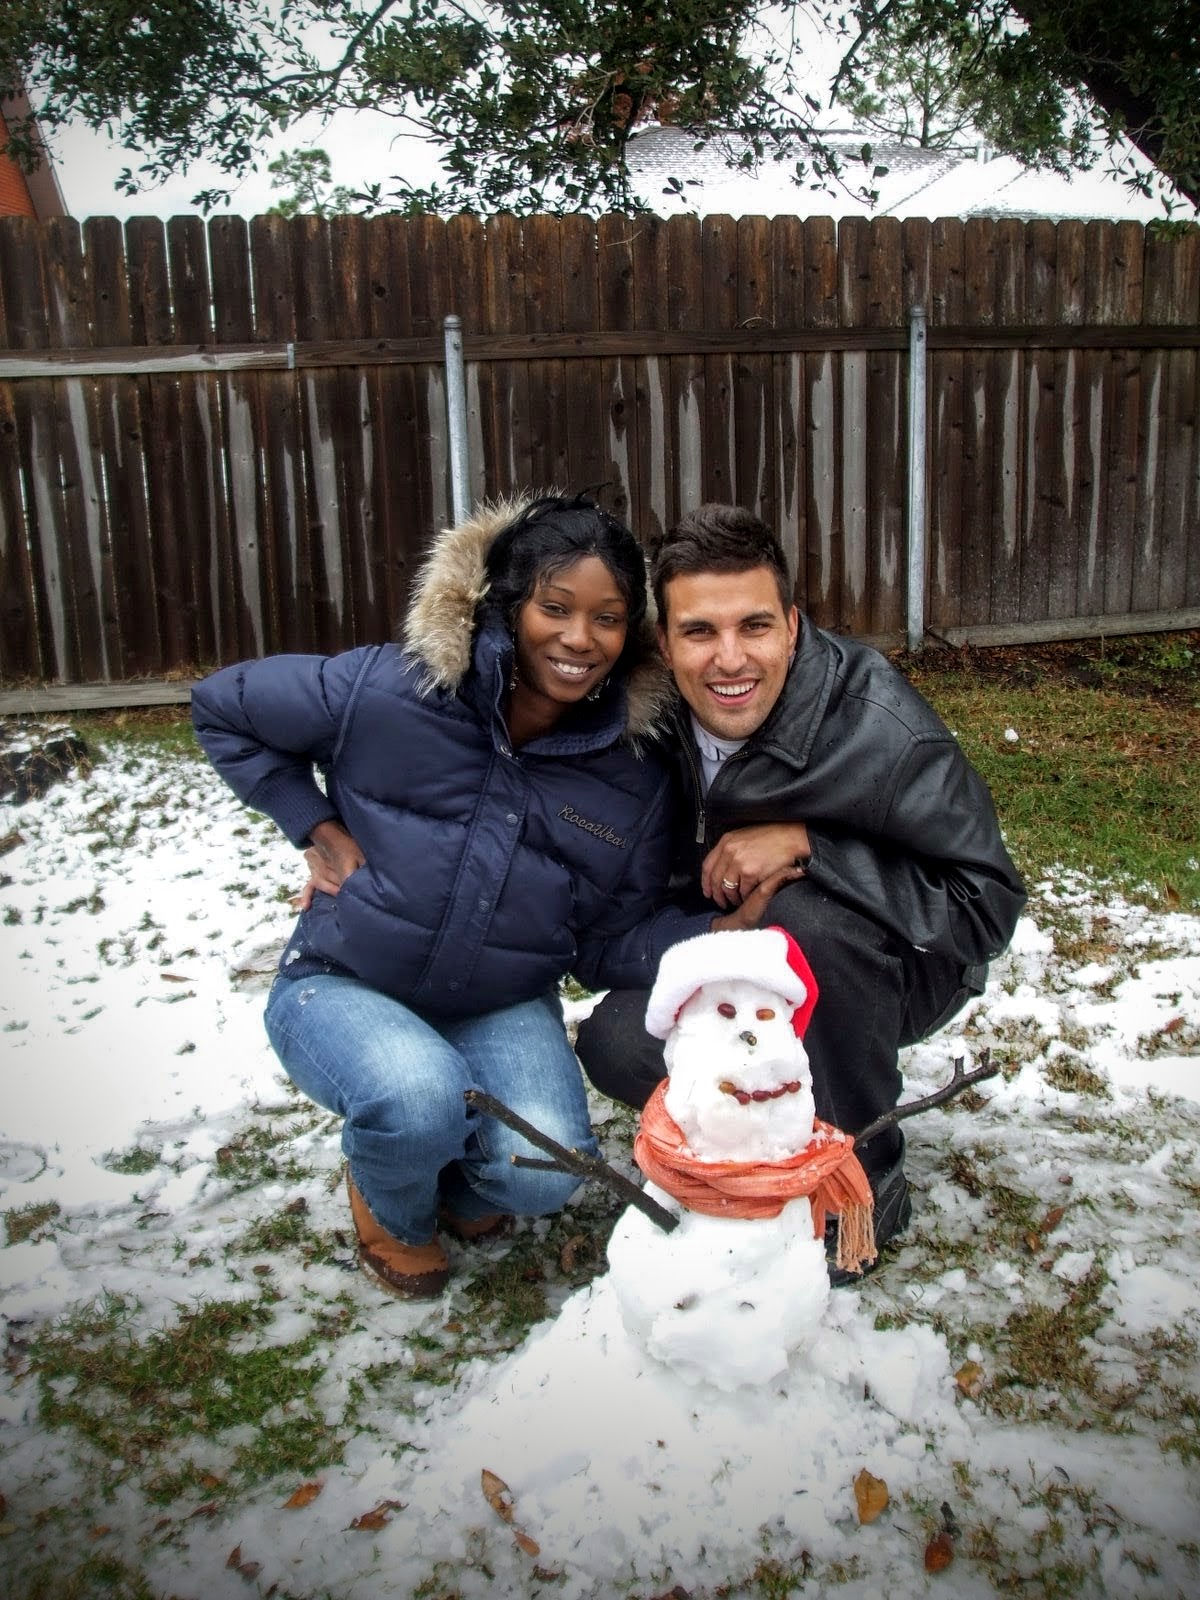 Married After Four Months Tenaj and Tino Next To A Snowman They Made